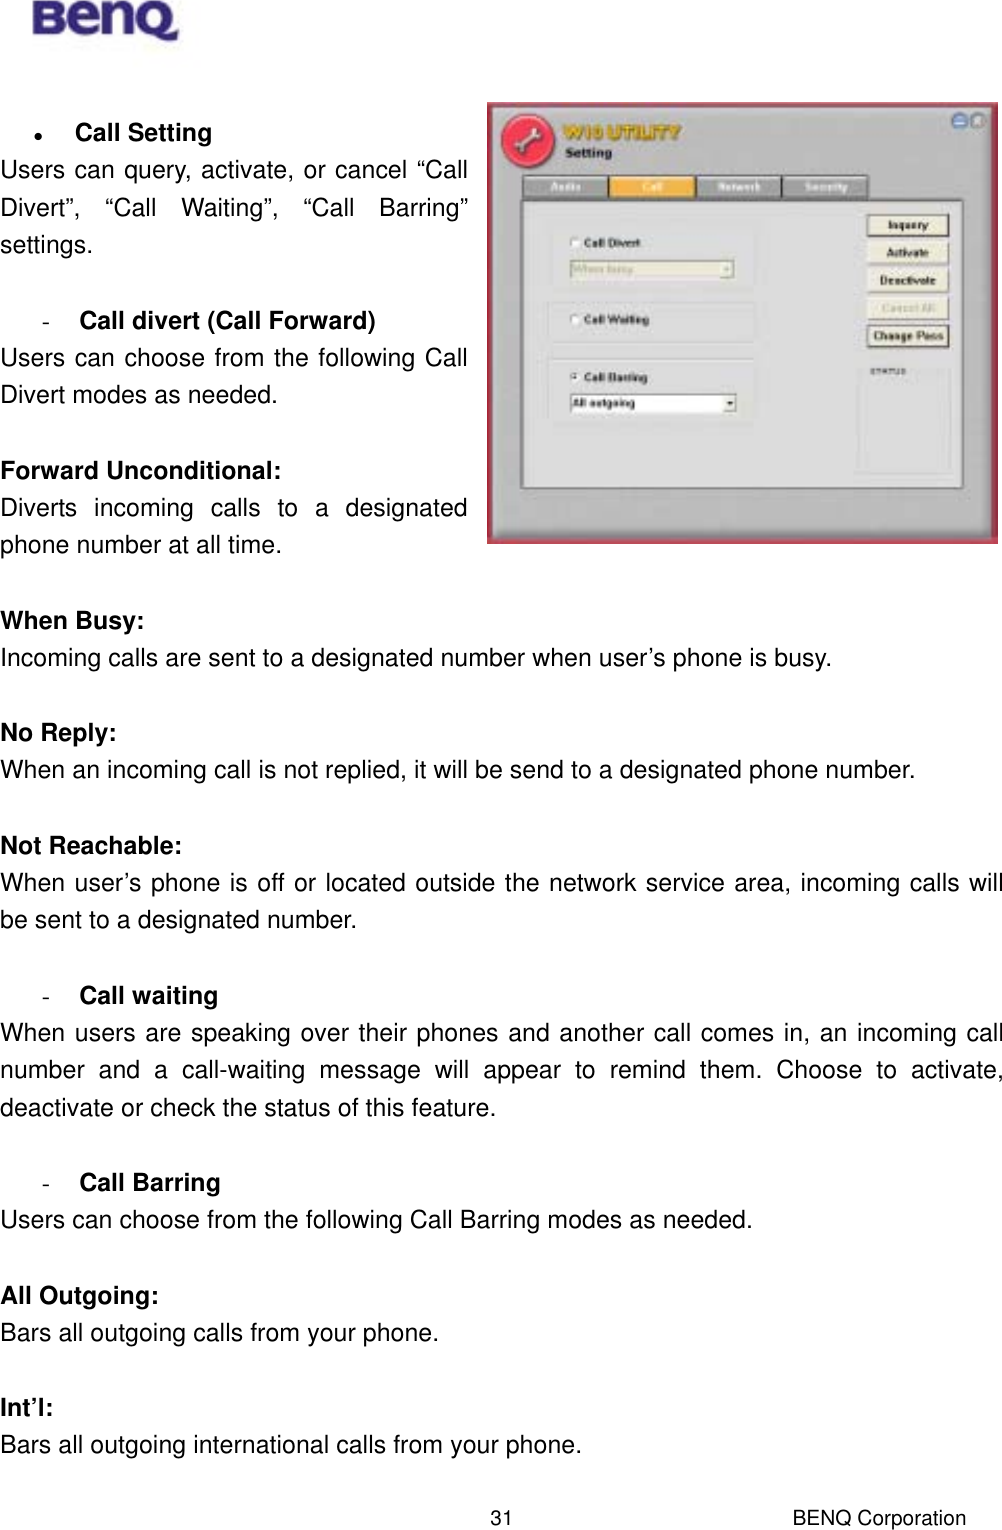  BENQ Corporation 31   Call Setting Users can query, activate, or cancel “Call Divert”, “Call Waiting”, “Call Barring” settings.    -  Call divert (Call Forward) Users can choose from the following Call Divert modes as needed.  Forward Unconditional:  Diverts incoming calls to a designated phone number at all time.  When Busy:  Incoming calls are sent to a designated number when user’s phone is busy.    No Reply:  When an incoming call is not replied, it will be send to a designated phone number.    Not Reachable:  When user’s phone is off or located outside the network service area, incoming calls will be sent to a designated number.  -  Call waiting When users are speaking over their phones and another call comes in, an incoming call number and a call-waiting message will appear to remind them. Choose to activate, deactivate or check the status of this feature.  -  Call Barring Users can choose from the following Call Barring modes as needed.  All Outgoing:  Bars all outgoing calls from your phone.    Int’l:  Bars all outgoing international calls from your phone.  